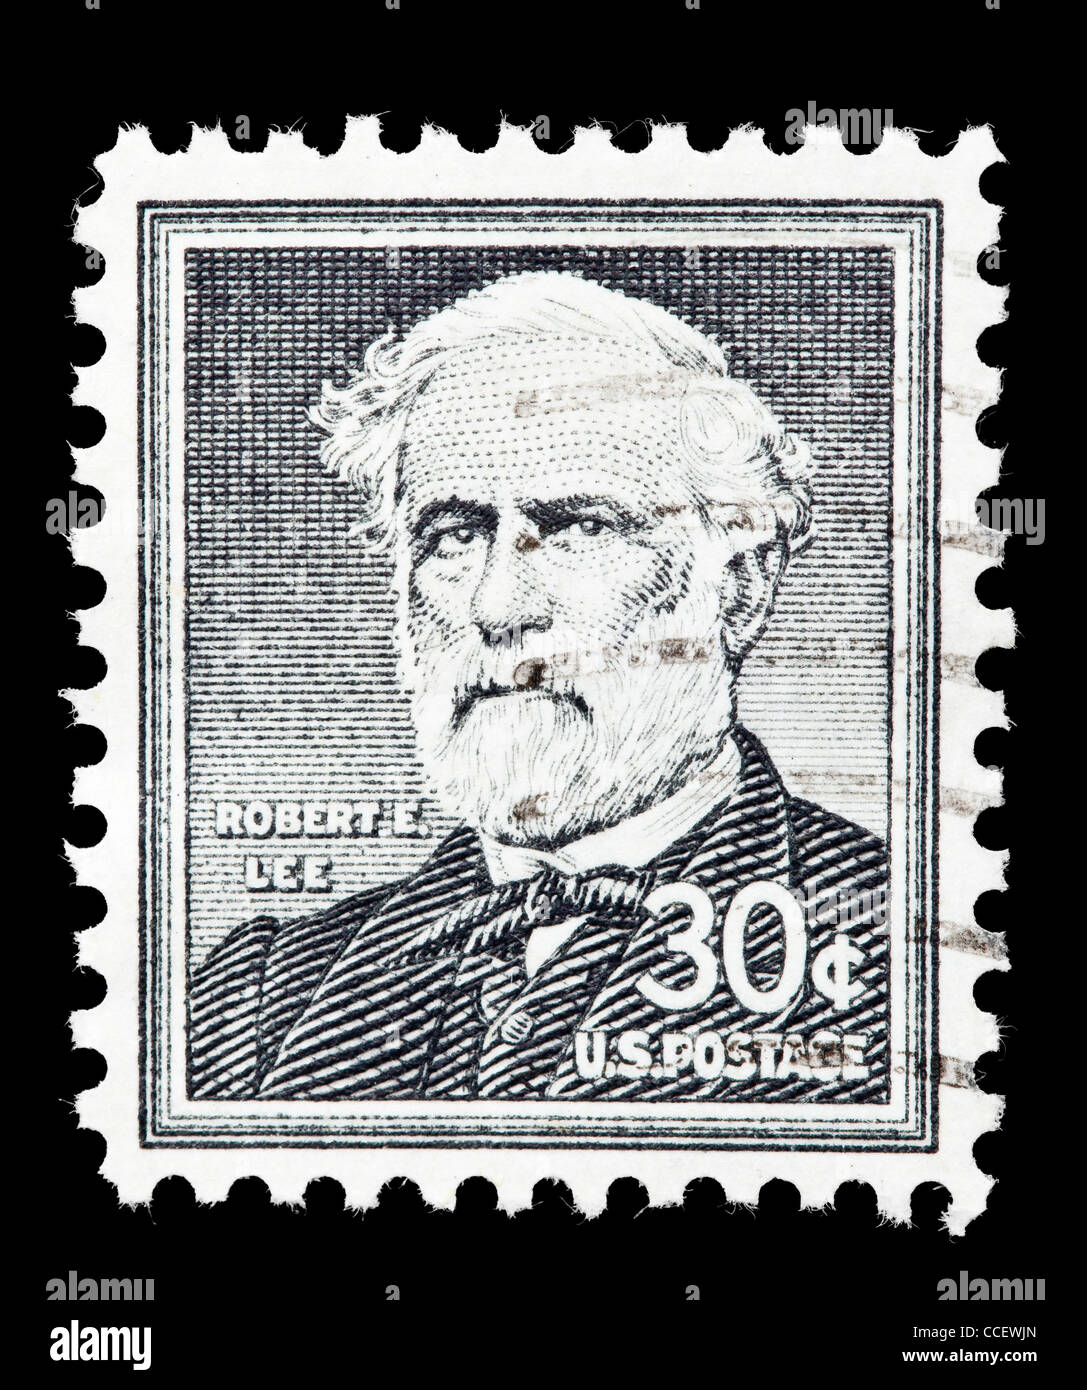 Postage stamp: United States Postage, Robert E. Lee, 30 cent, 1957, stamped Stock Photo